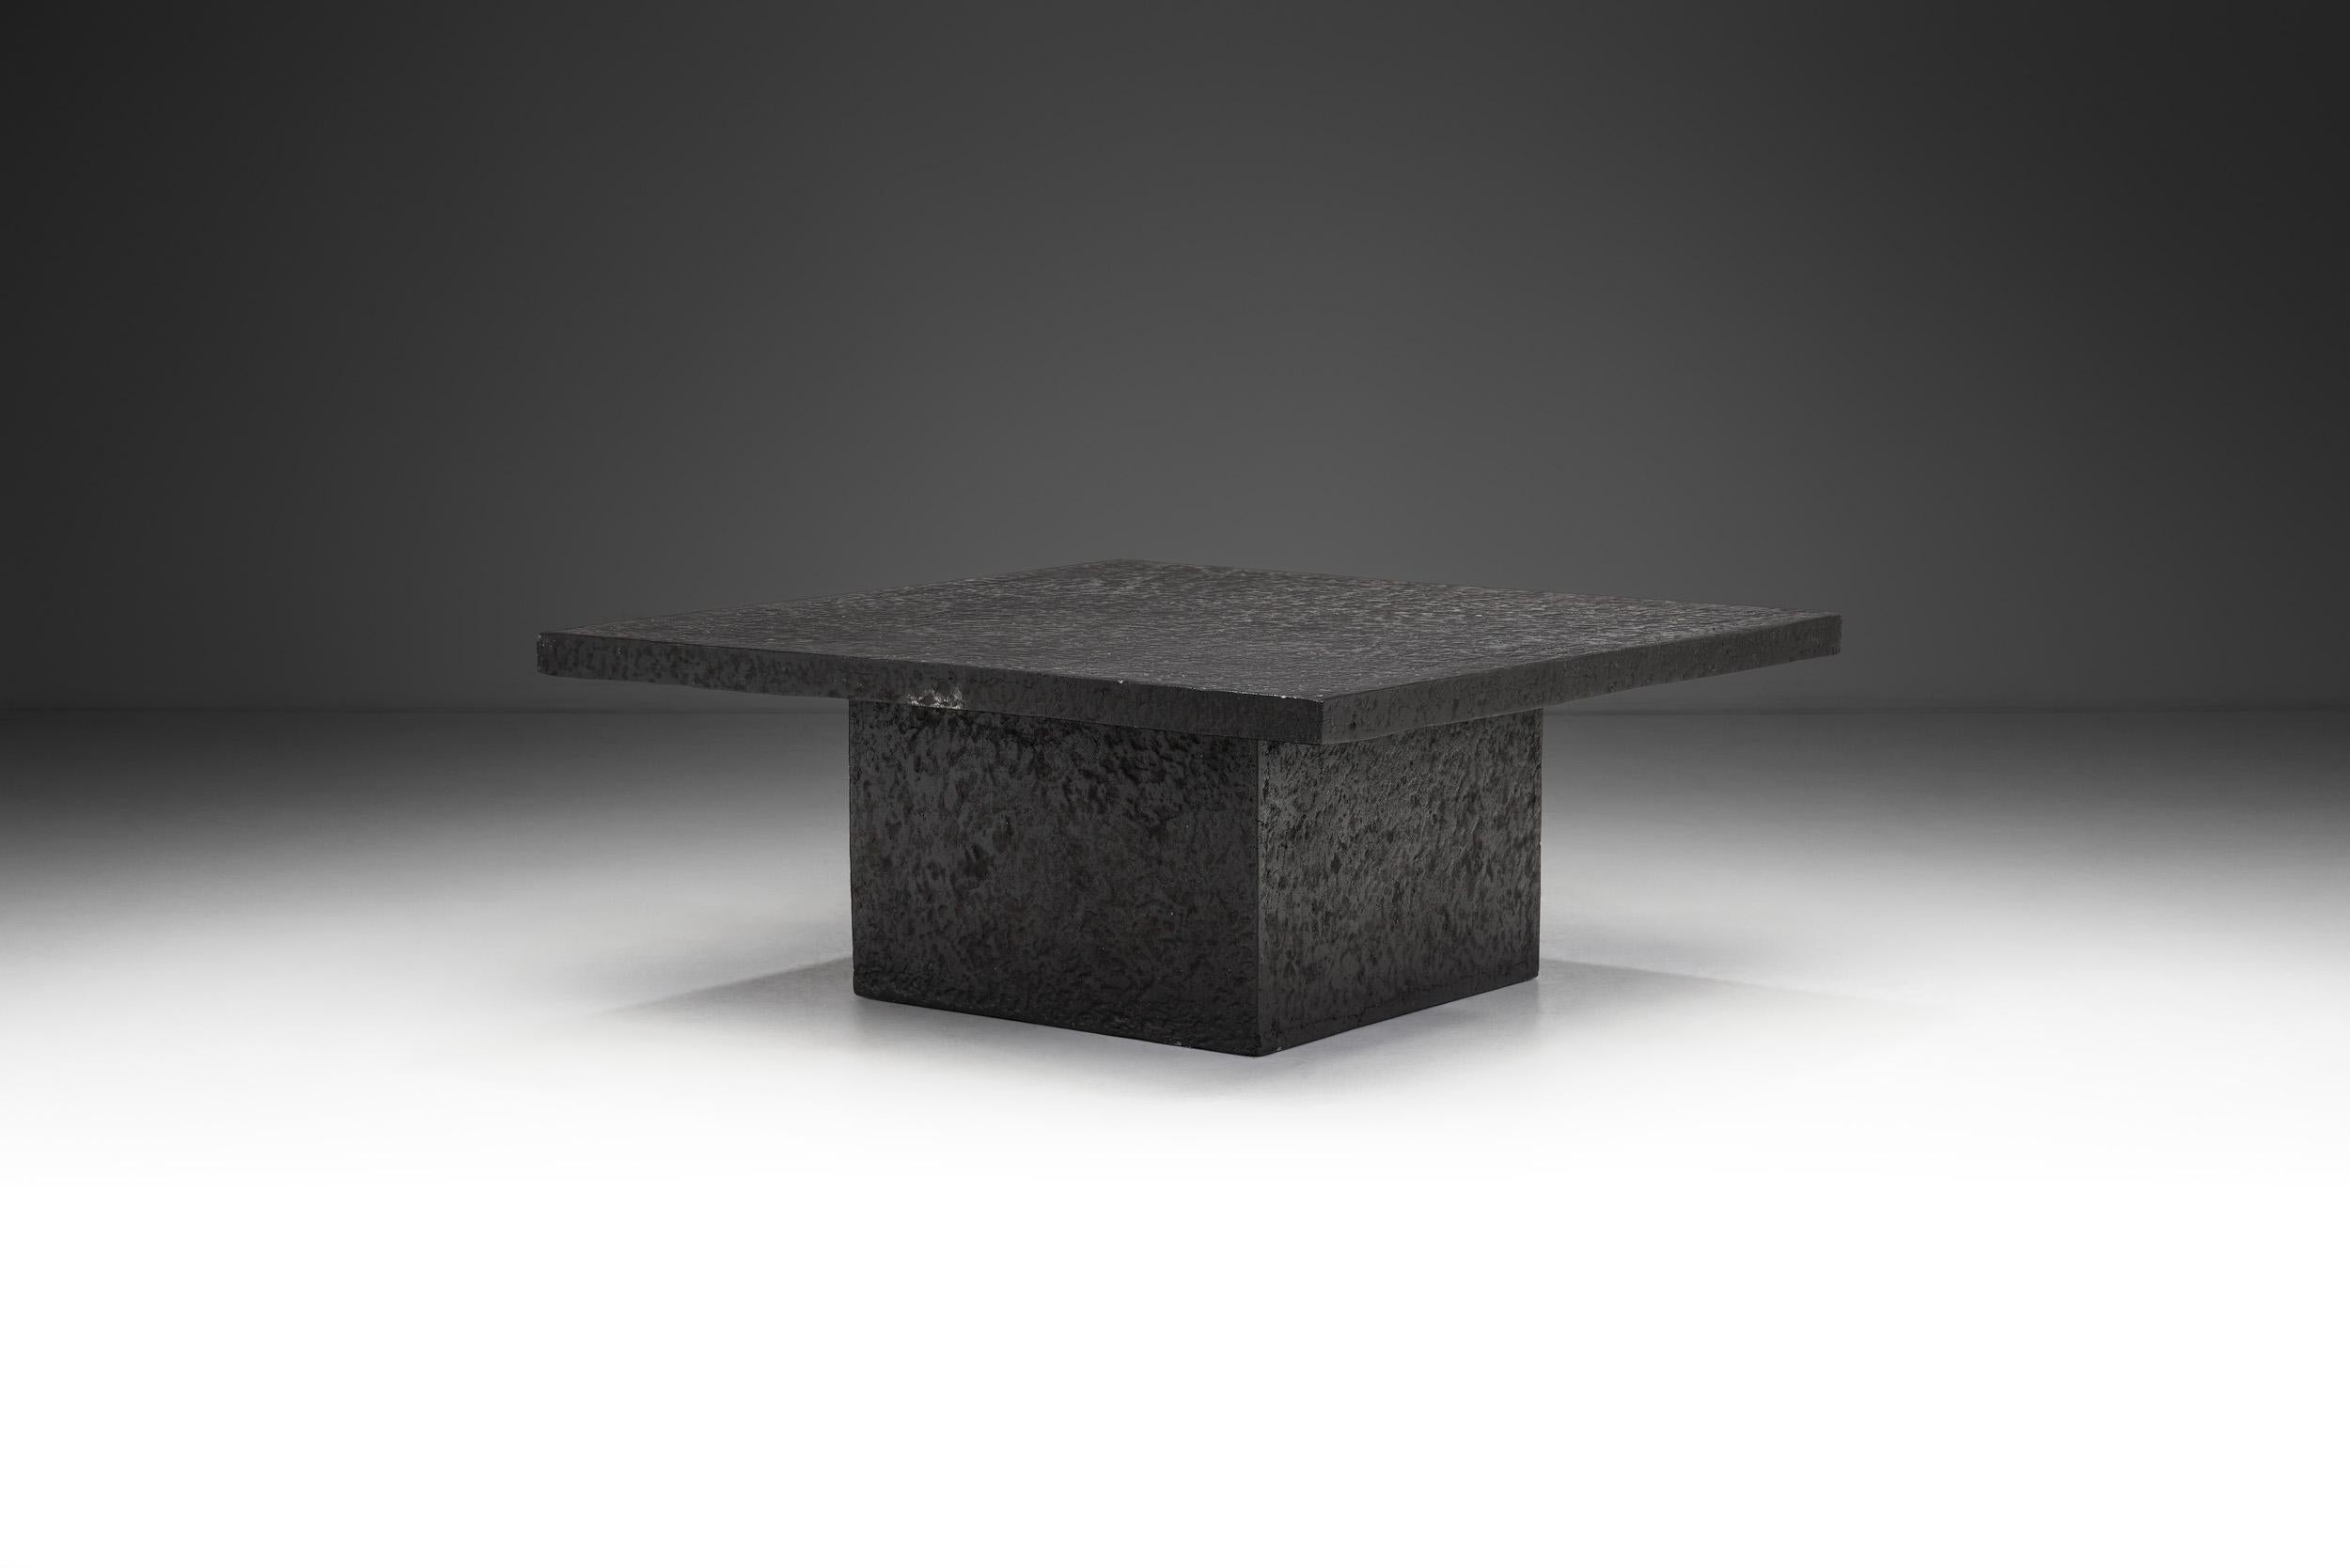 Resin Brutalist Black Square Polychrome Coffee Table, Europe 20th Century